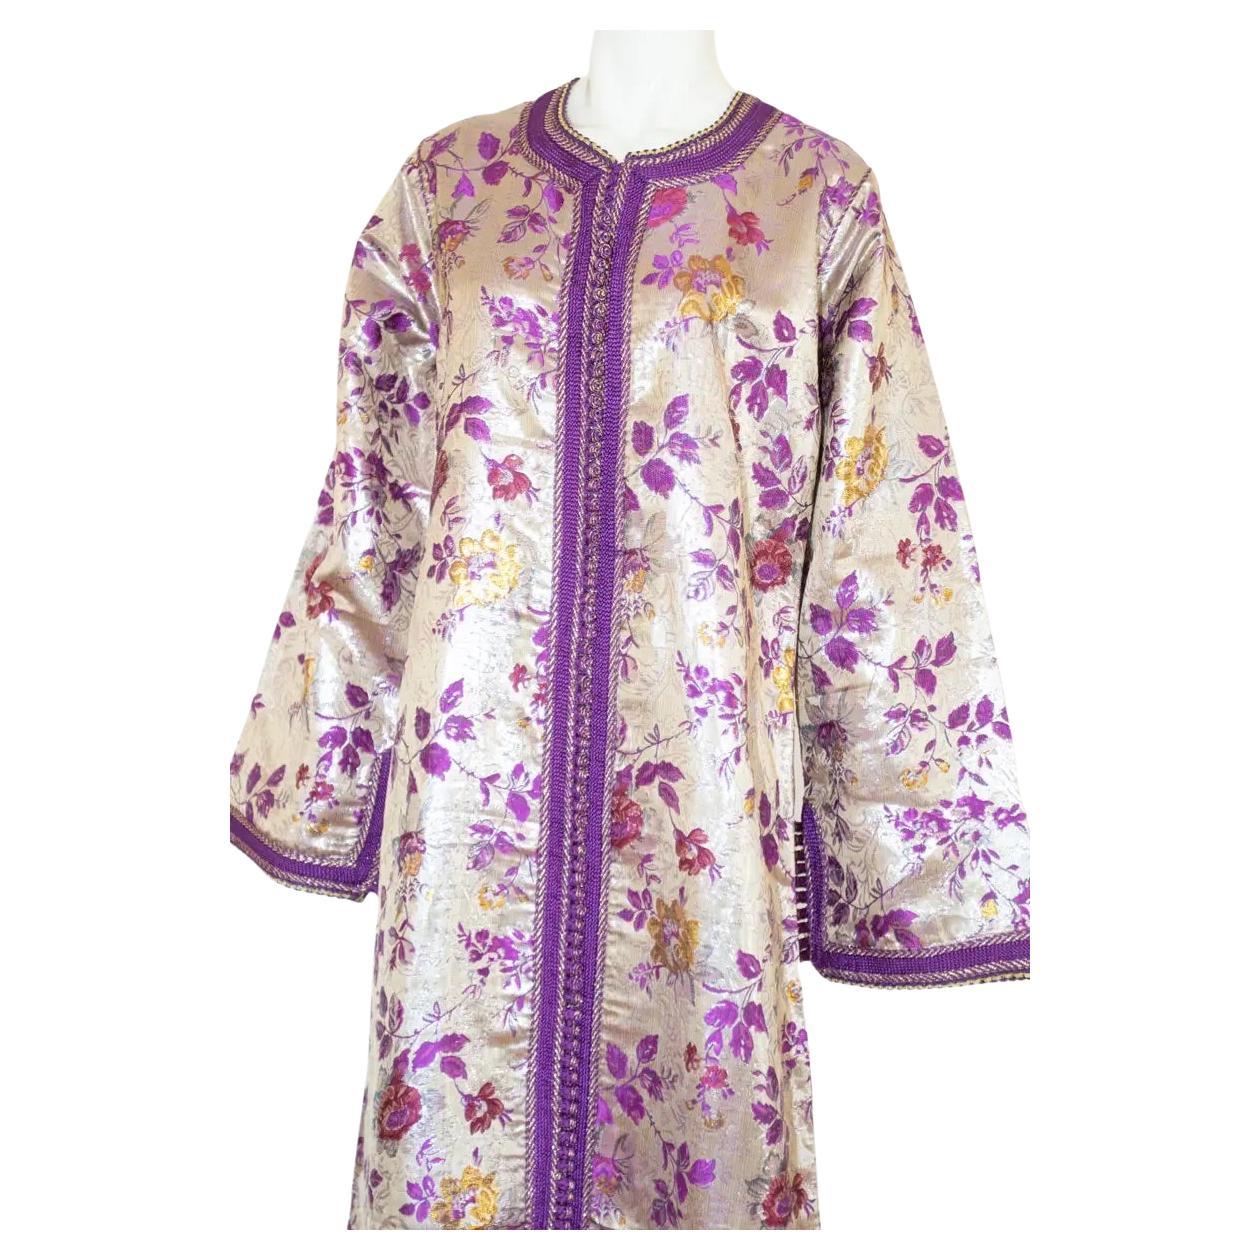 Amazing vintage Moroccan Caftan, gold silk damask purple violet threads trim, Circa 1960's
The silver and purple with gold floral damask kaftan was entirely finish by hand.
Feel like a queen in this elegant, sumptuous, Moroccan caftan with its